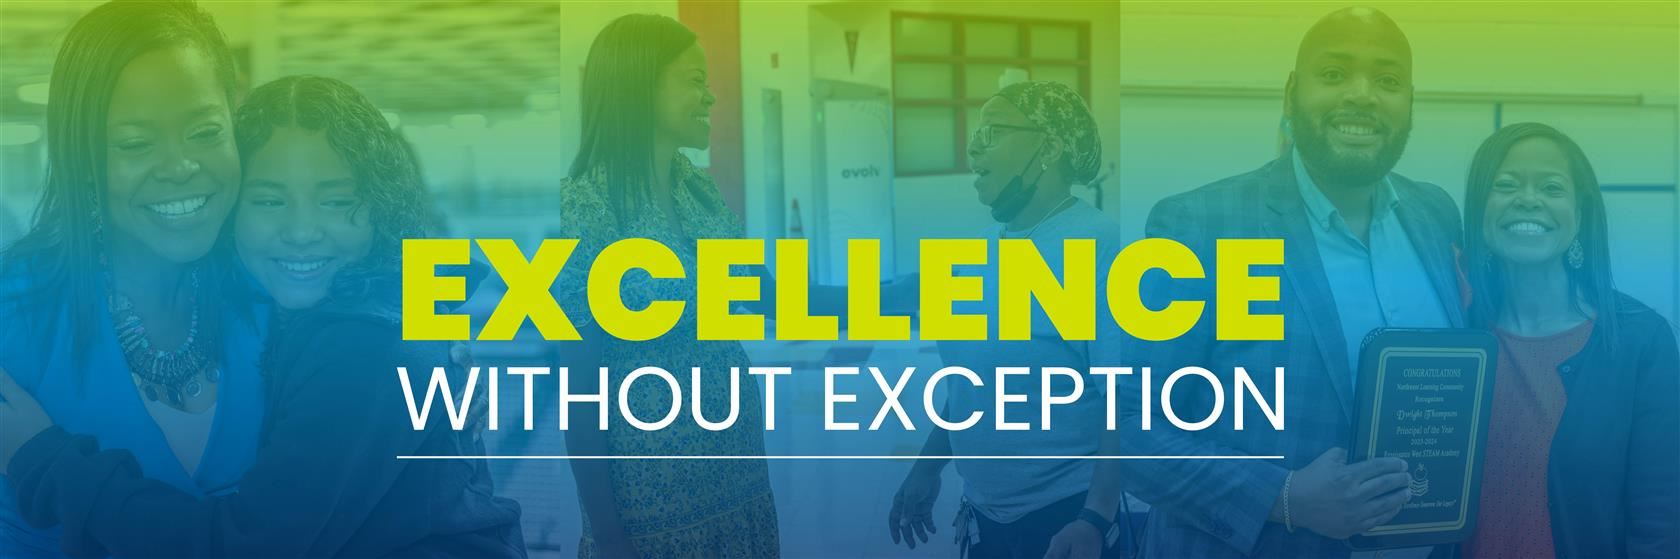 Excellence without Exception